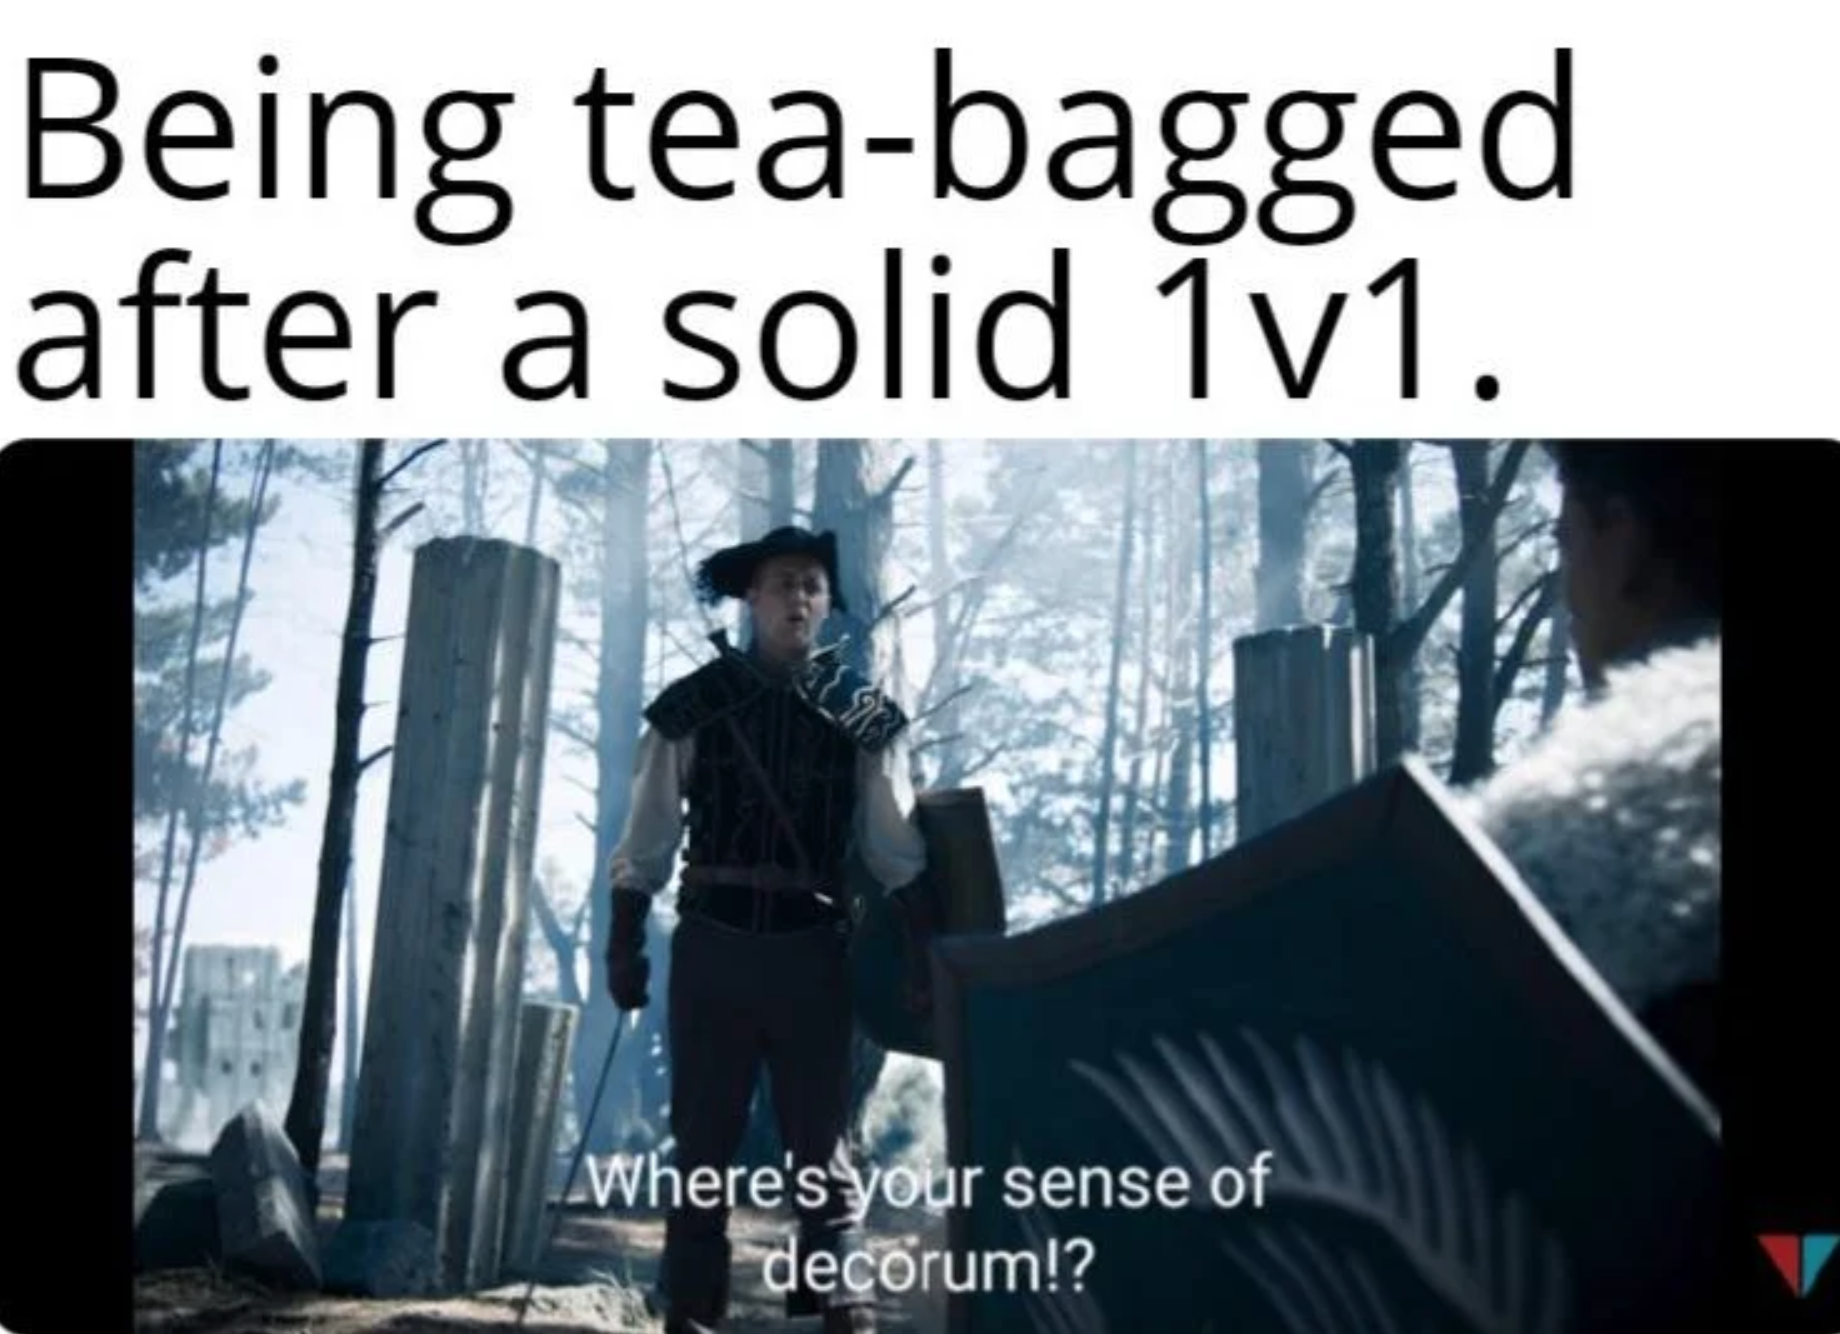 funny gaming memes - film - Being teabagged after a solid 1v1. Where's your sense of decorum!?